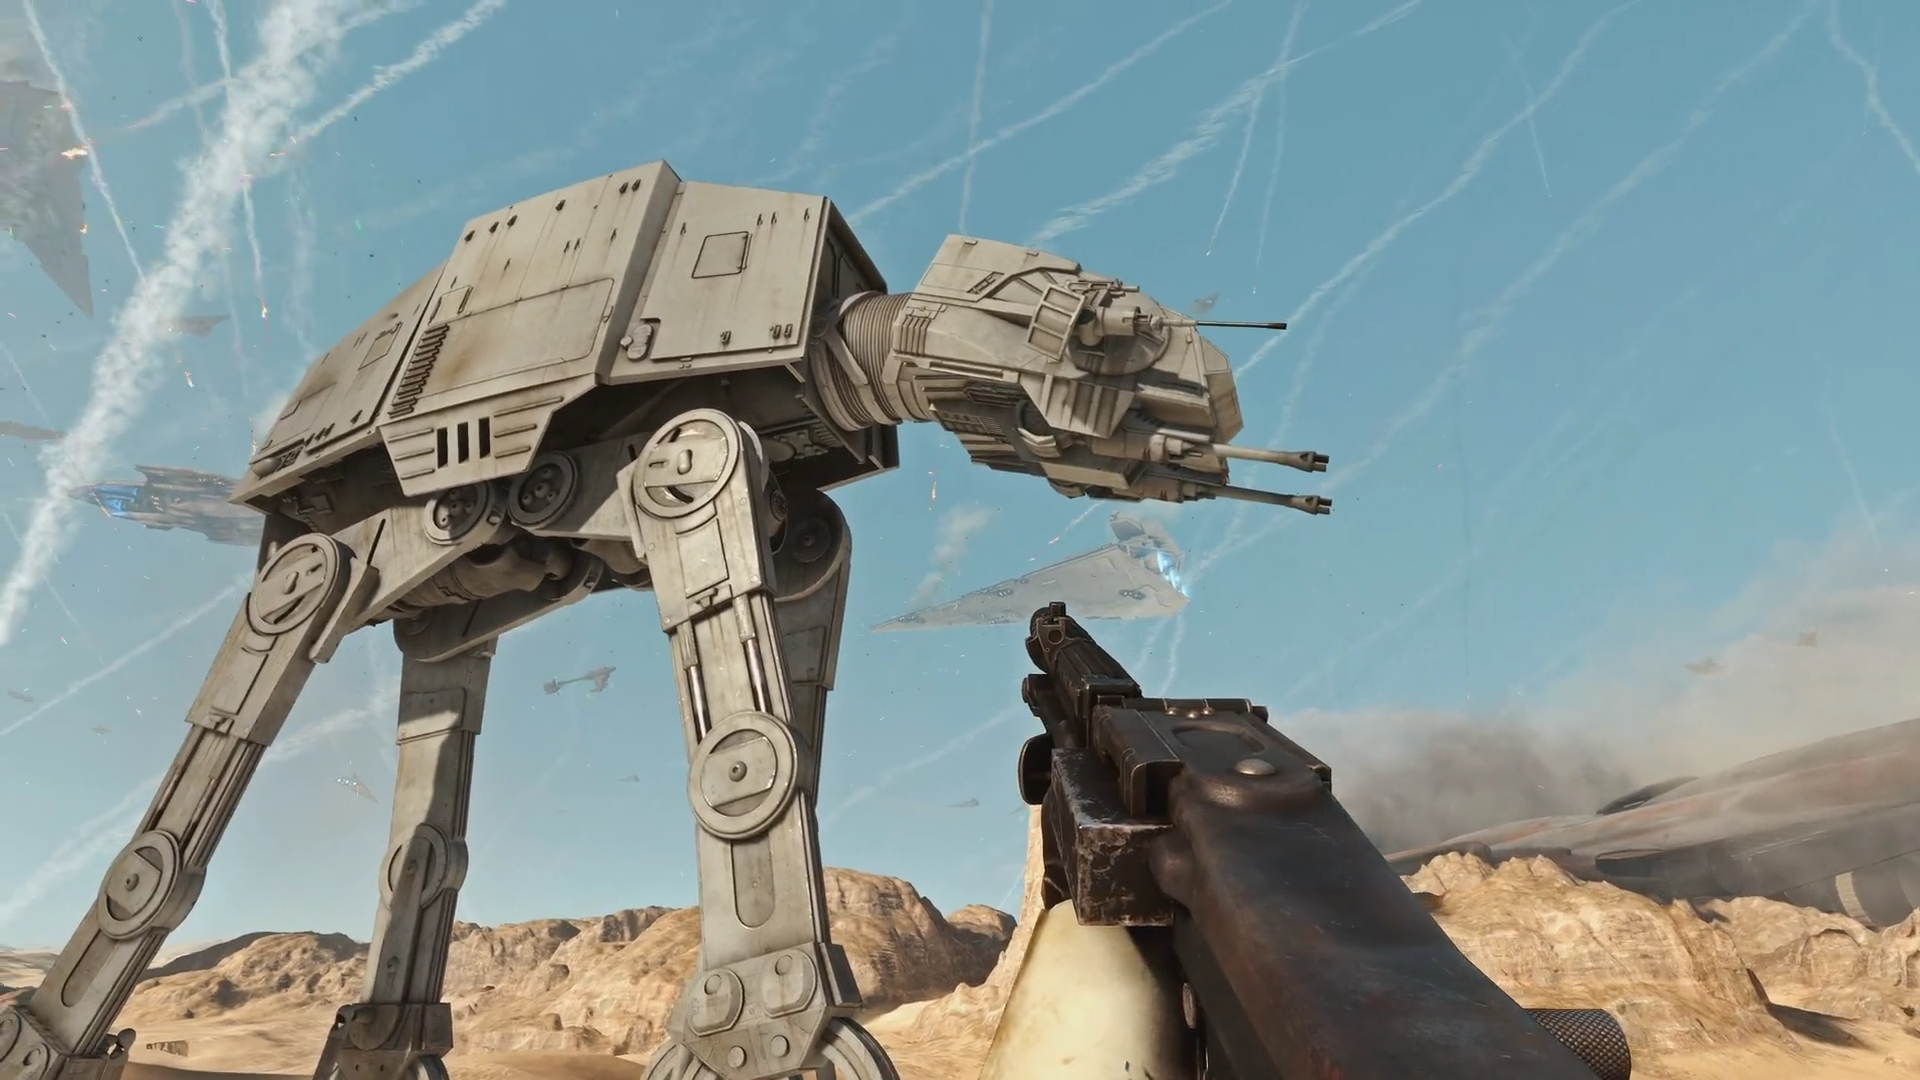 this is the best star wars movie you’ll see this year battlefront running in 4k 60fps image 1